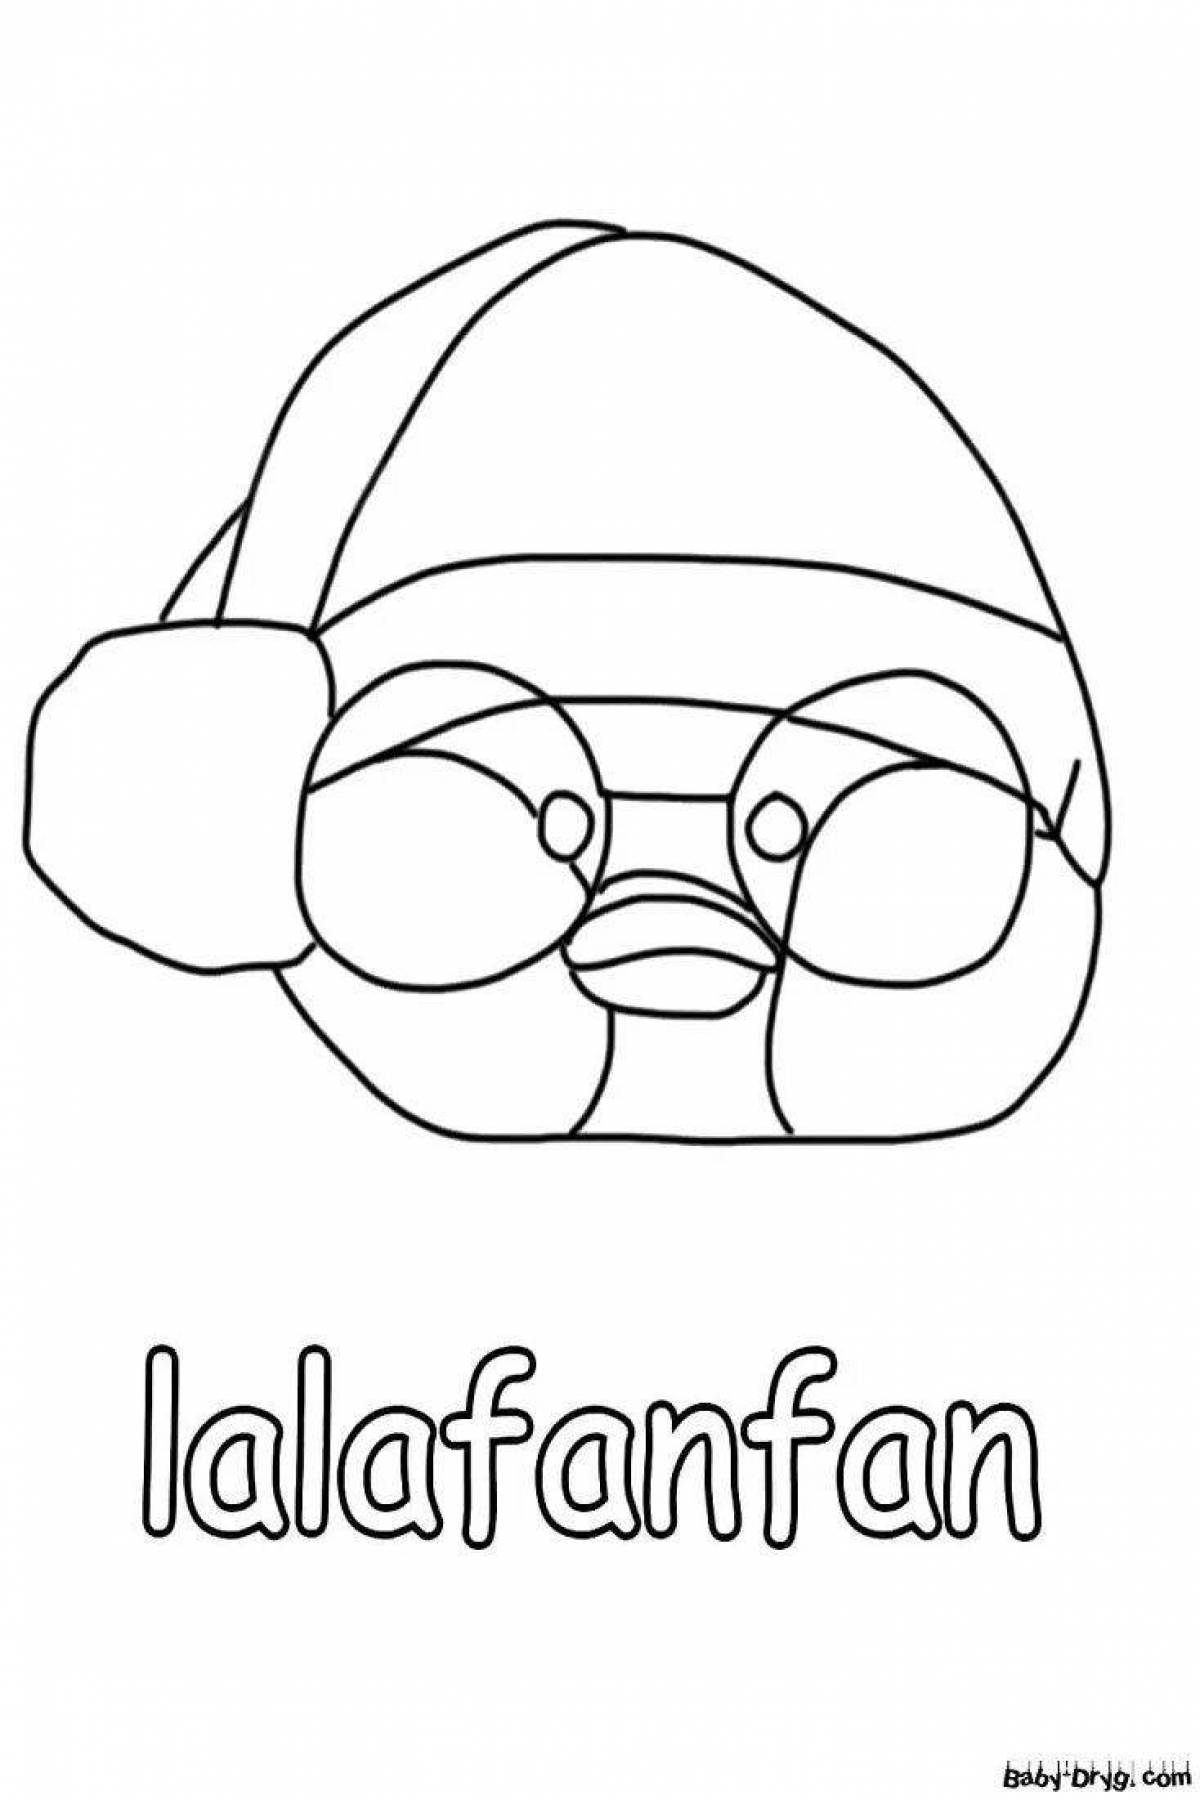 Lalanfant colorful duck coloring page